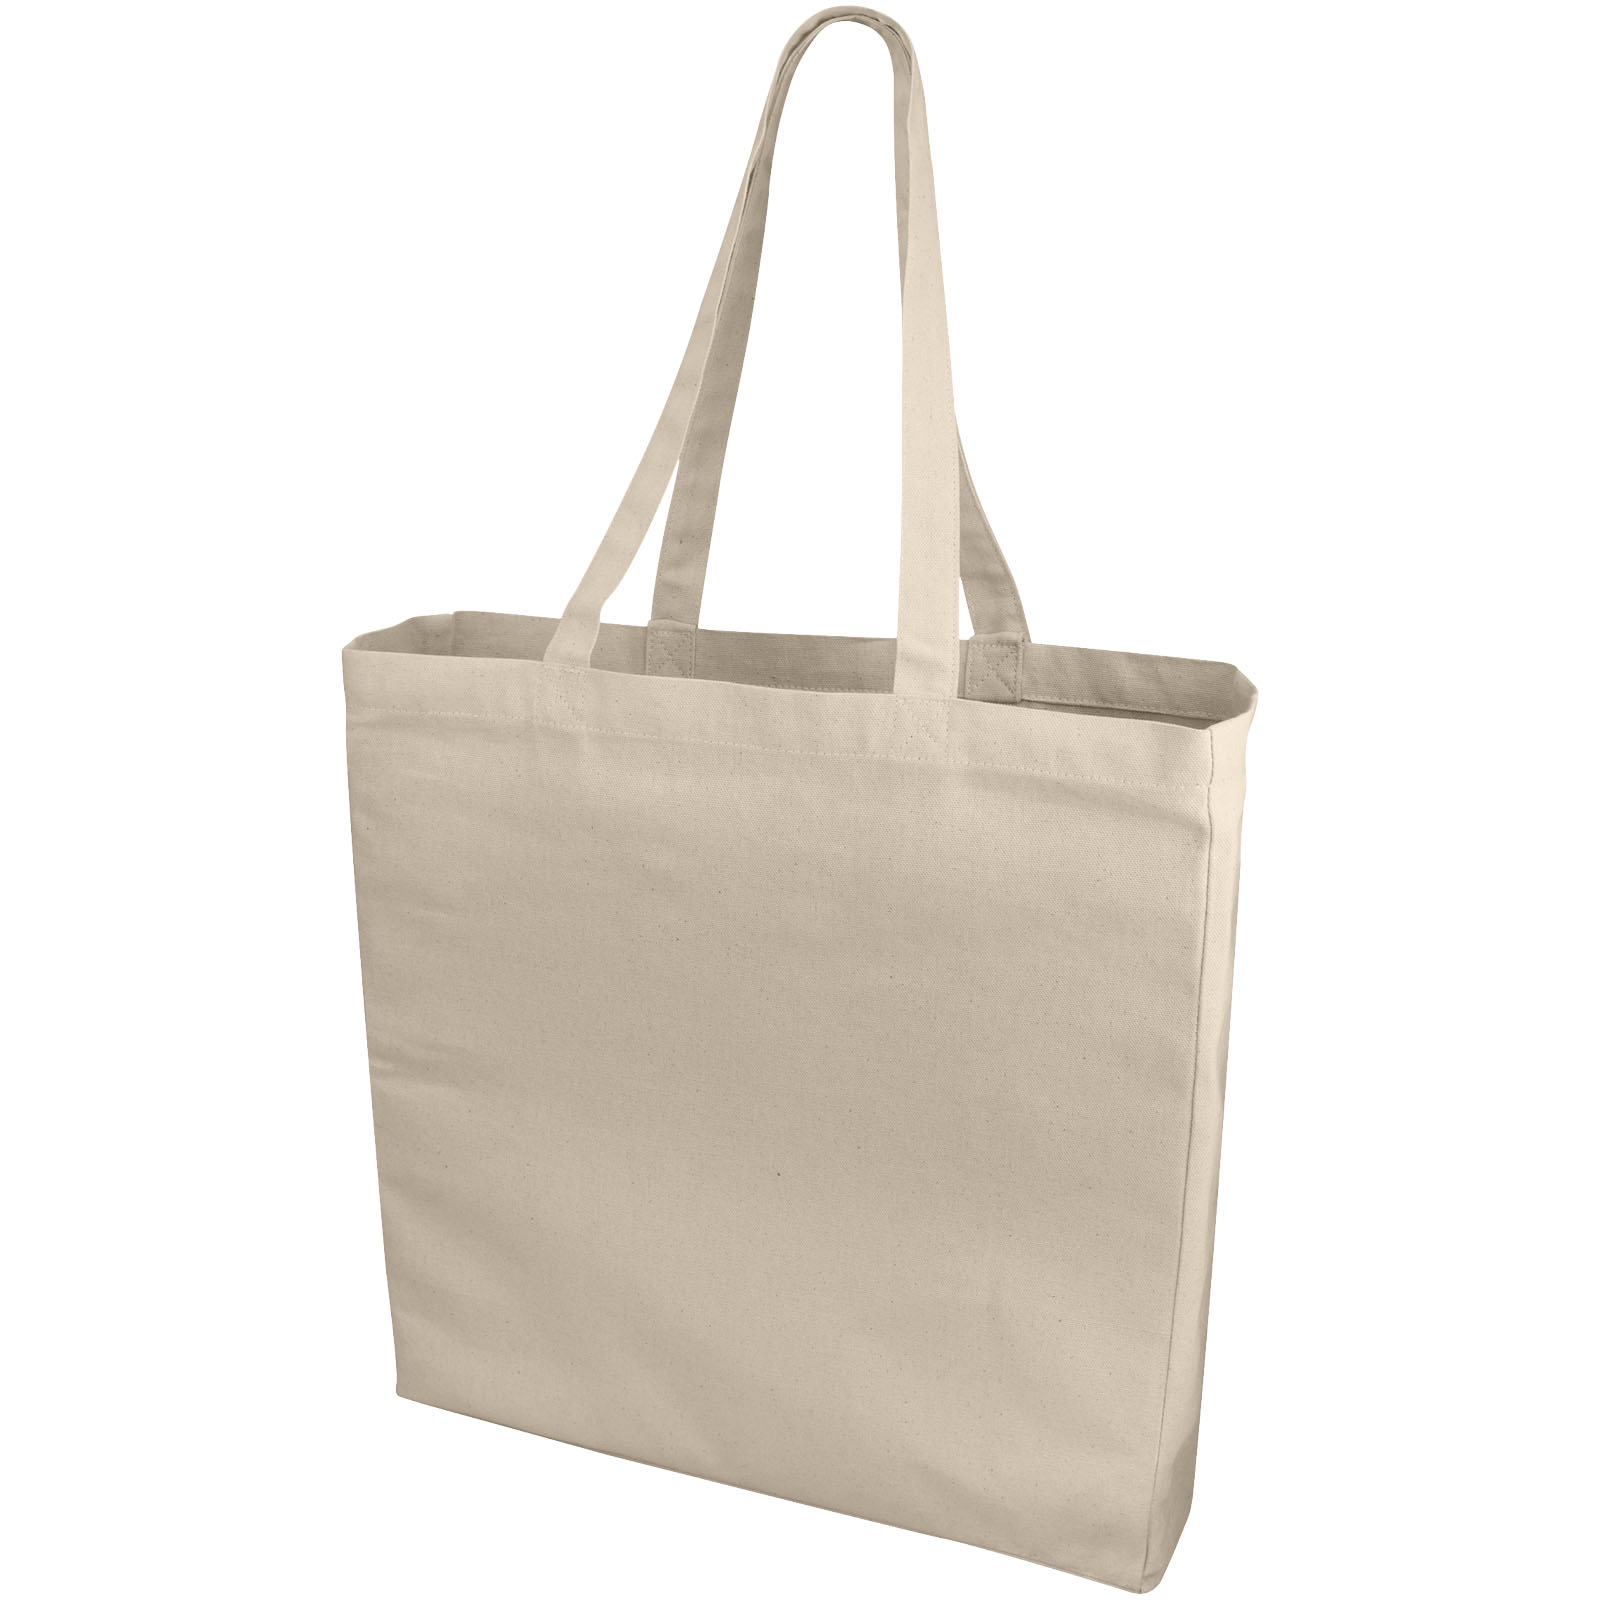 Shopping & Tote Bags - Odessa 220 g/m² cotton tote bag 13L